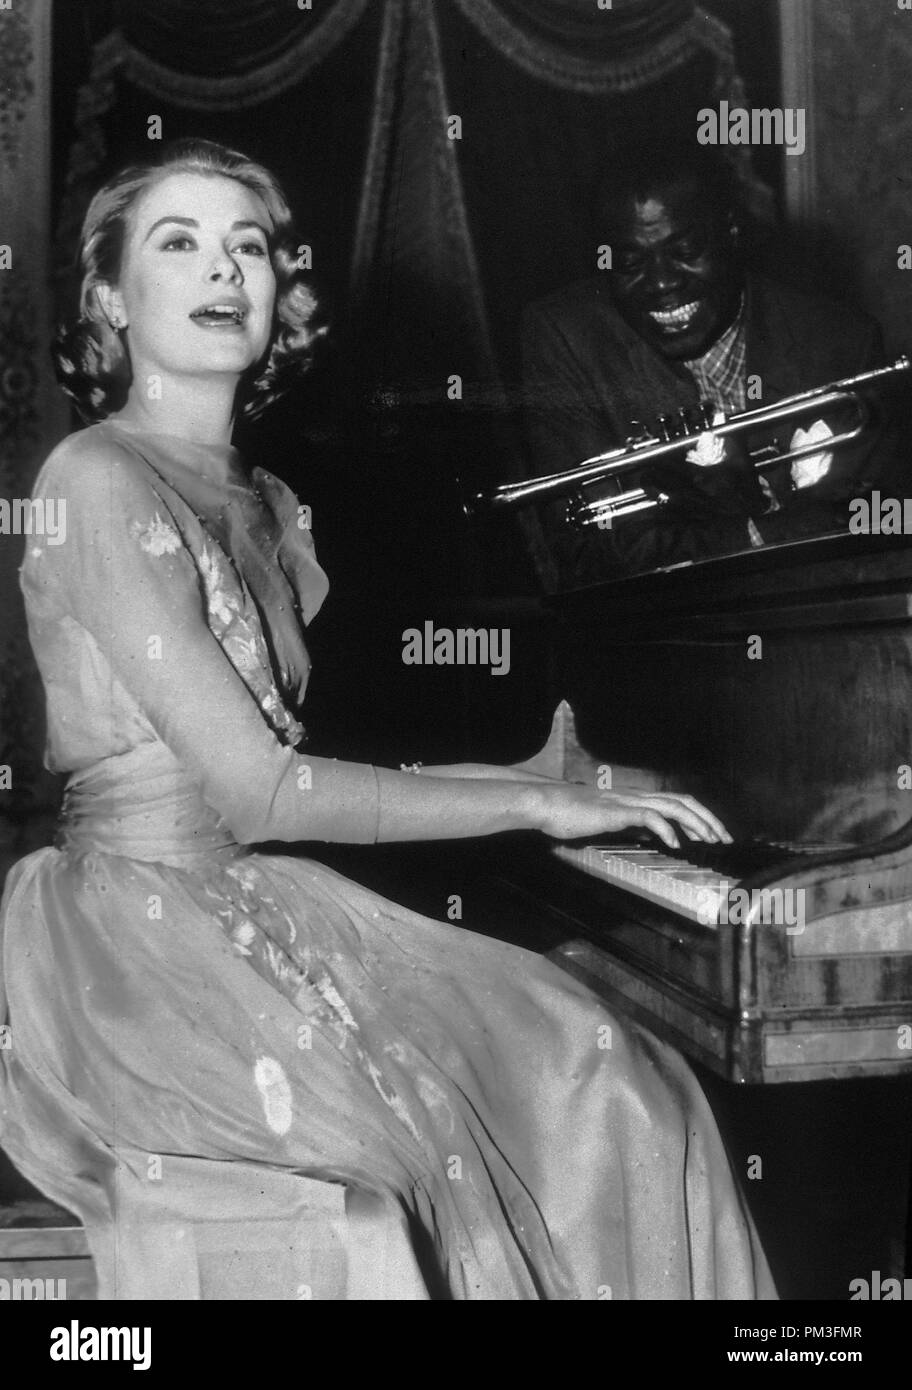 Studio Publicity Still: 'High Society'   Grace Kelly and Louis Armstrong  1956 MGM   File Reference # 30732 1264THA Stock Photo